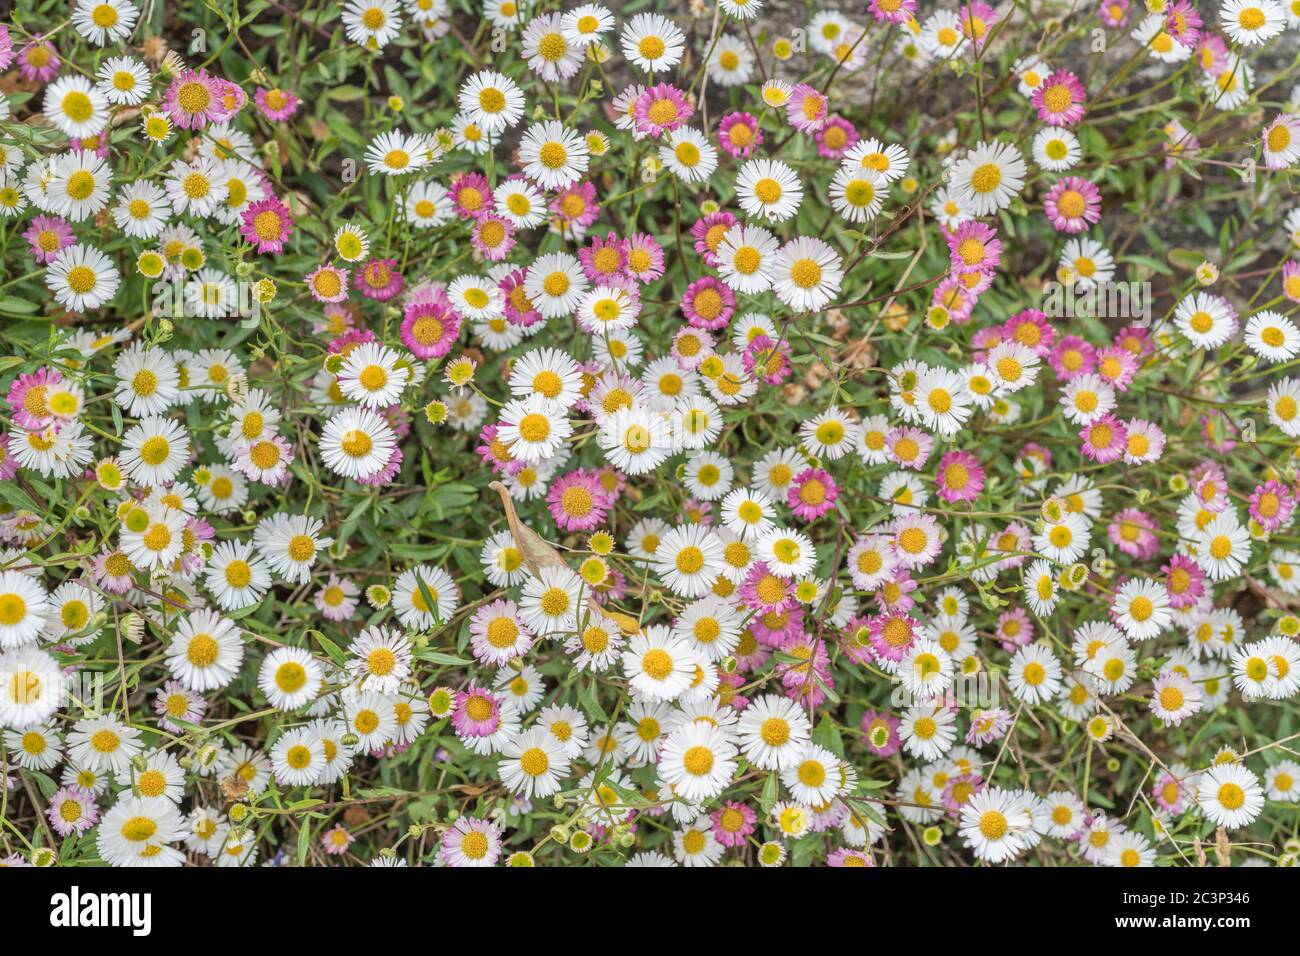 Patch of Mexican Fleabane, Spanish Daisy / Erigeron karvinskianus flowers. Invasive plant species in some countries. Medicinal plant in India. Stock Photo